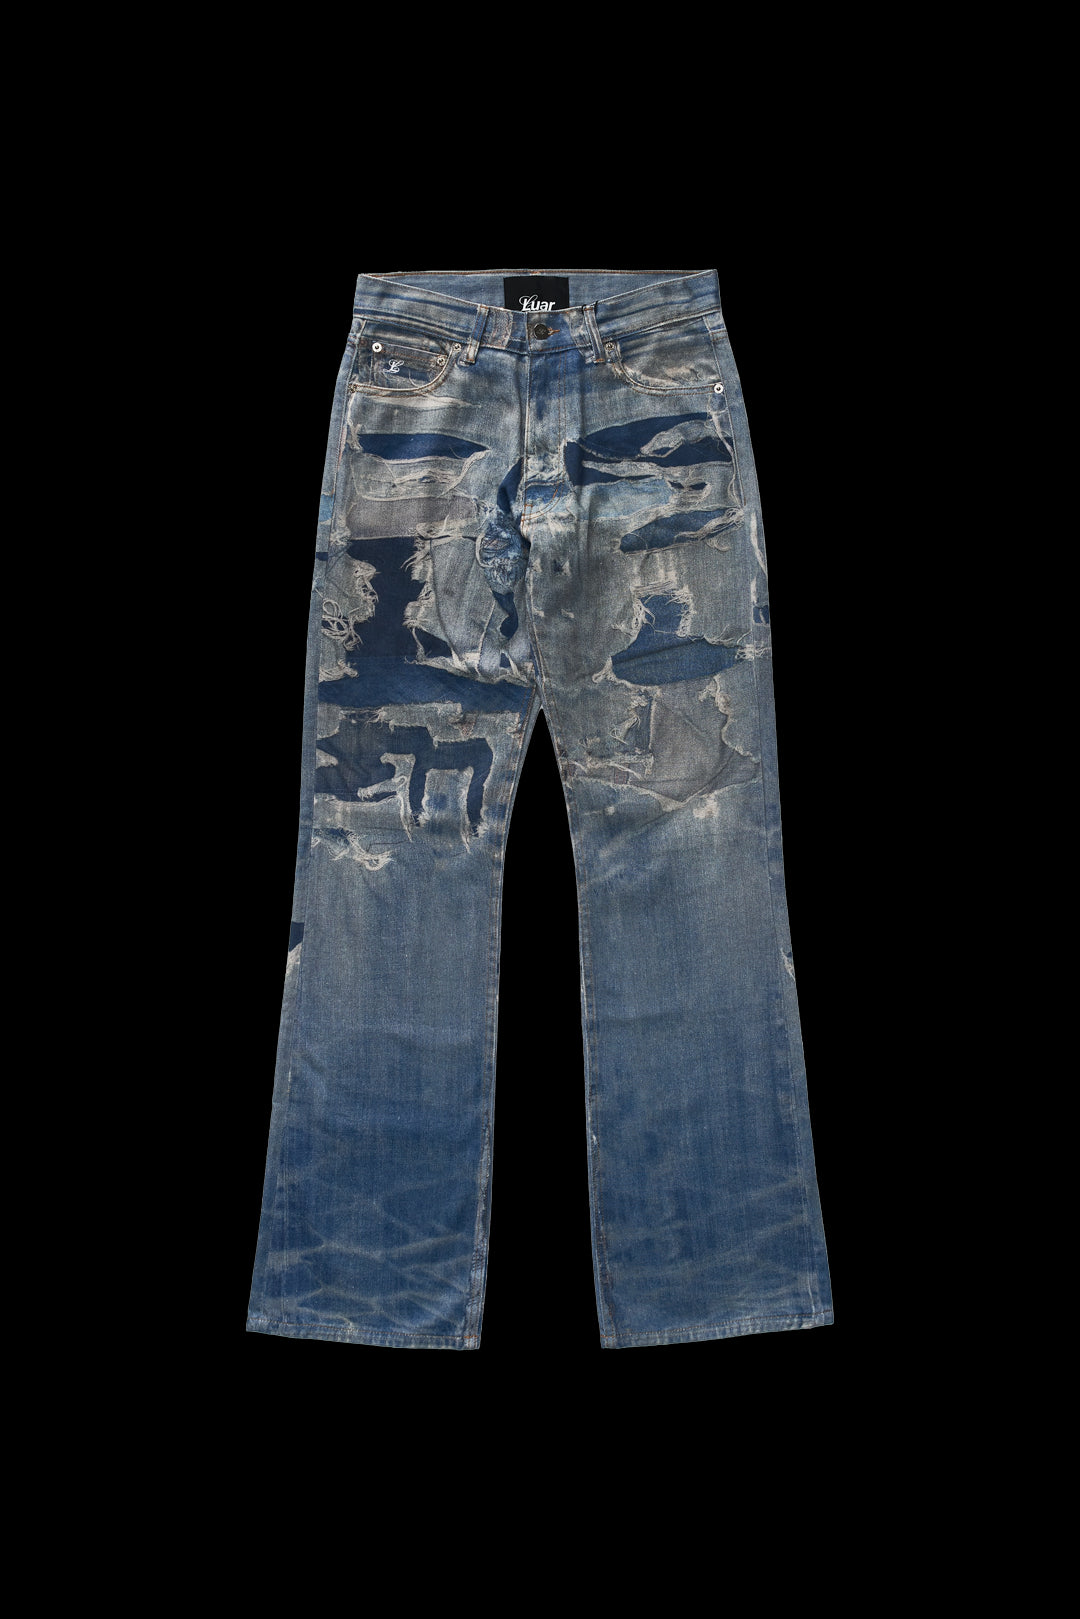 Luar
Unisex Adults Jeans
Color: BLUE
Material: Cotton
Made In 
SKU:LUARSS23-DNM-004